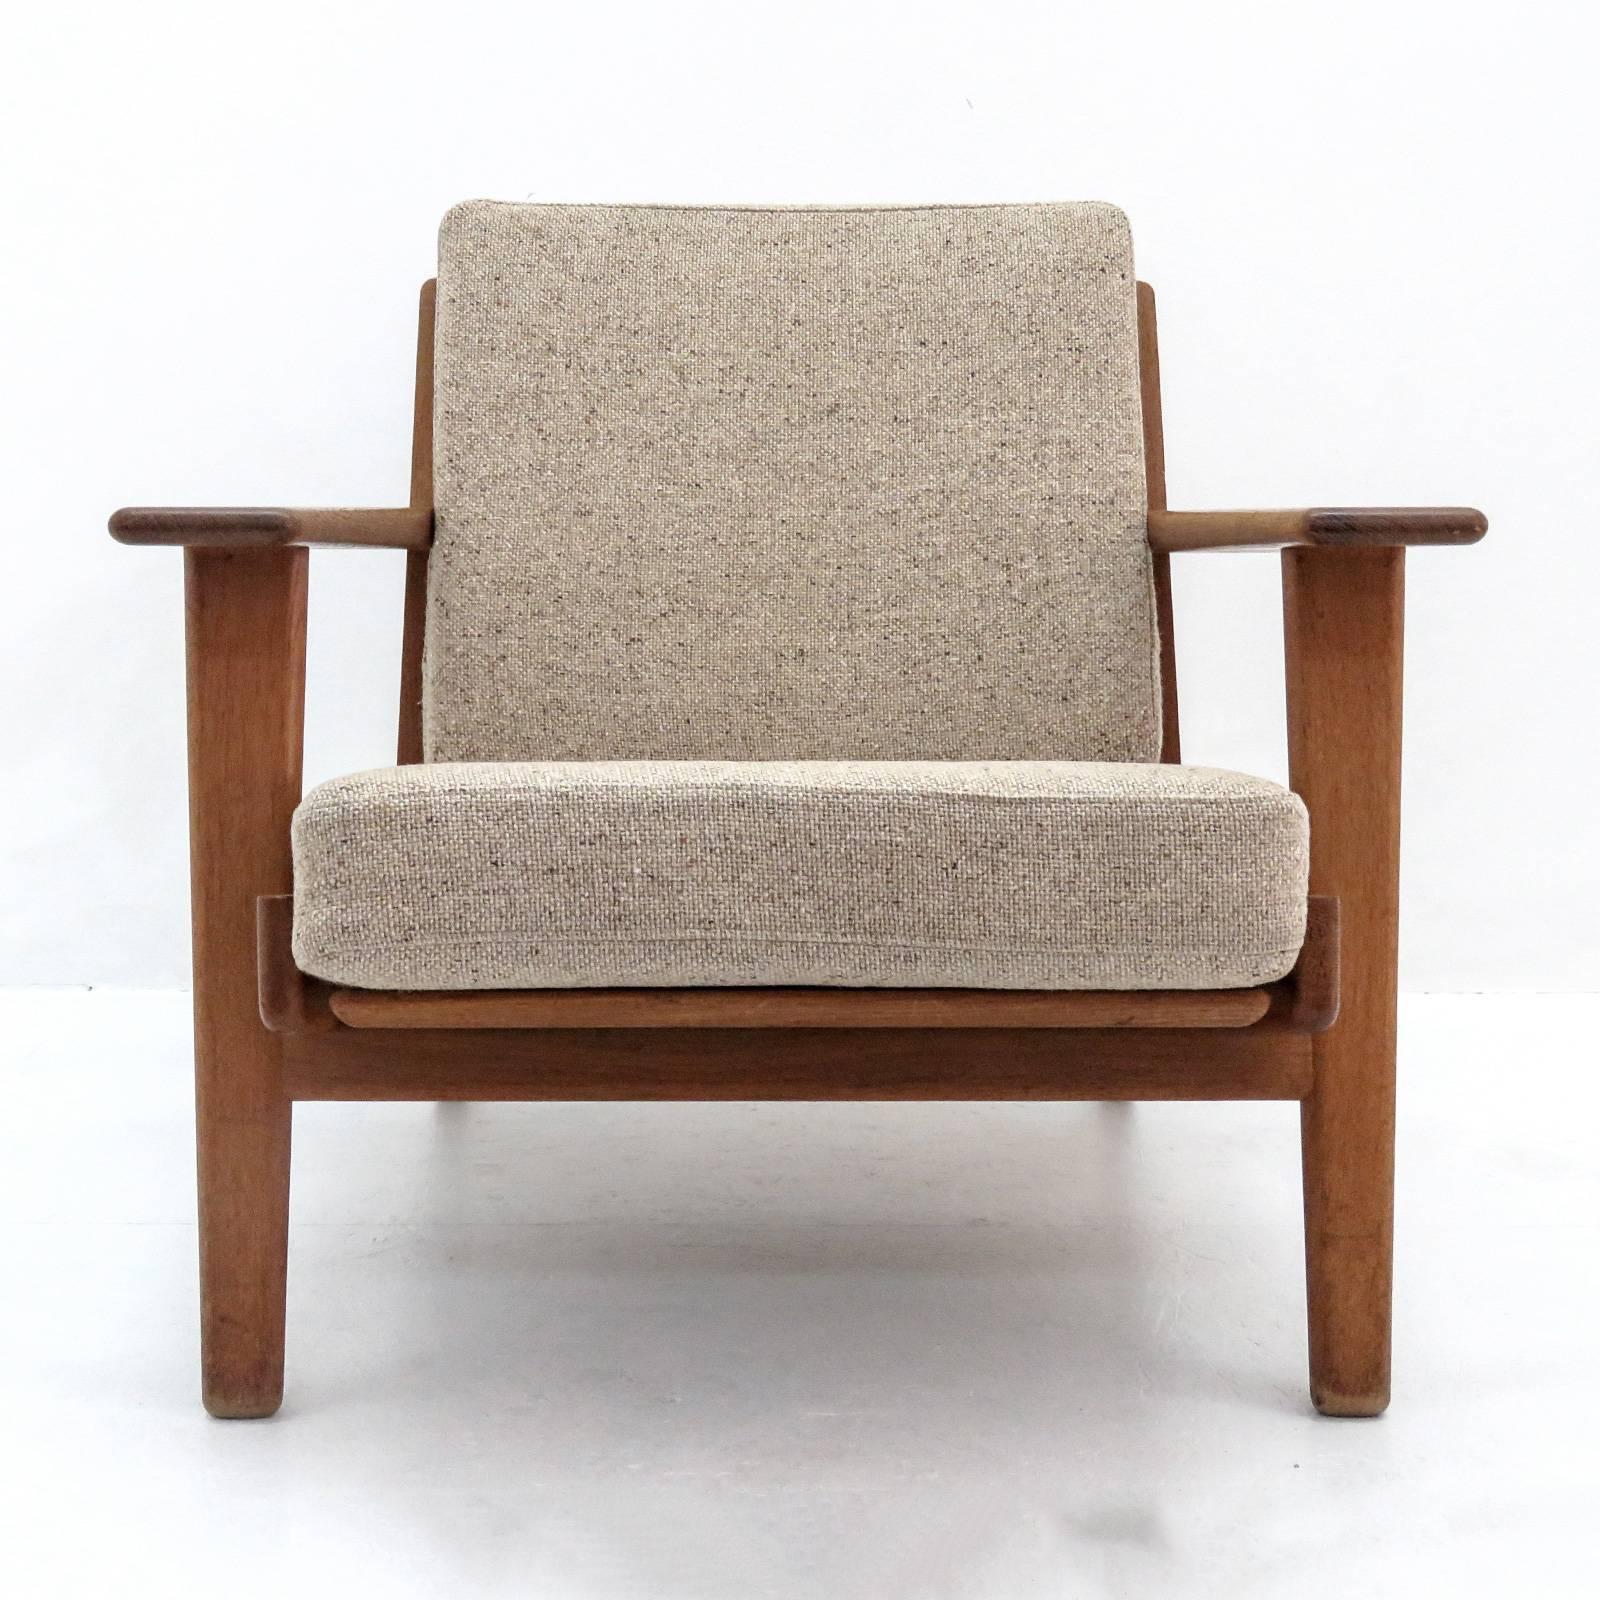 Wonderful lounge chair GE-290, designed by Hans J. Wegner for GETAMA in 1953, solid oak frame with nice patina and upholstered in beige gray wool on original spring cushions, marked.